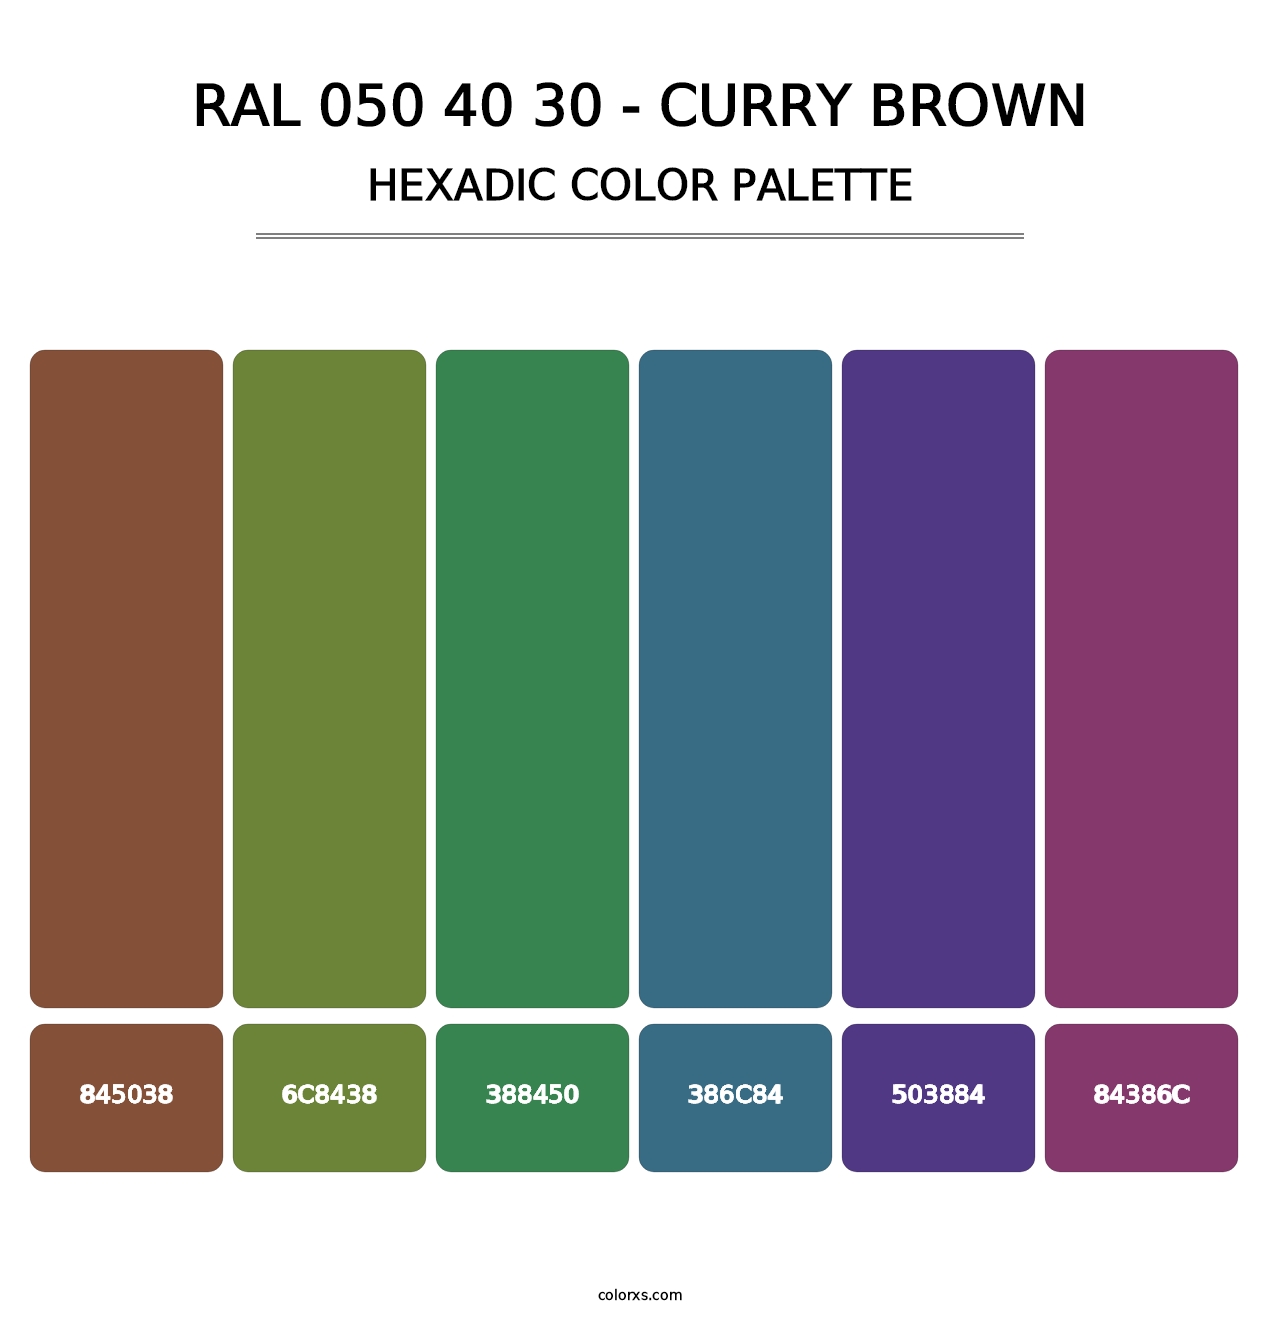 RAL 050 40 30 - Curry Brown - Hexadic Color Palette